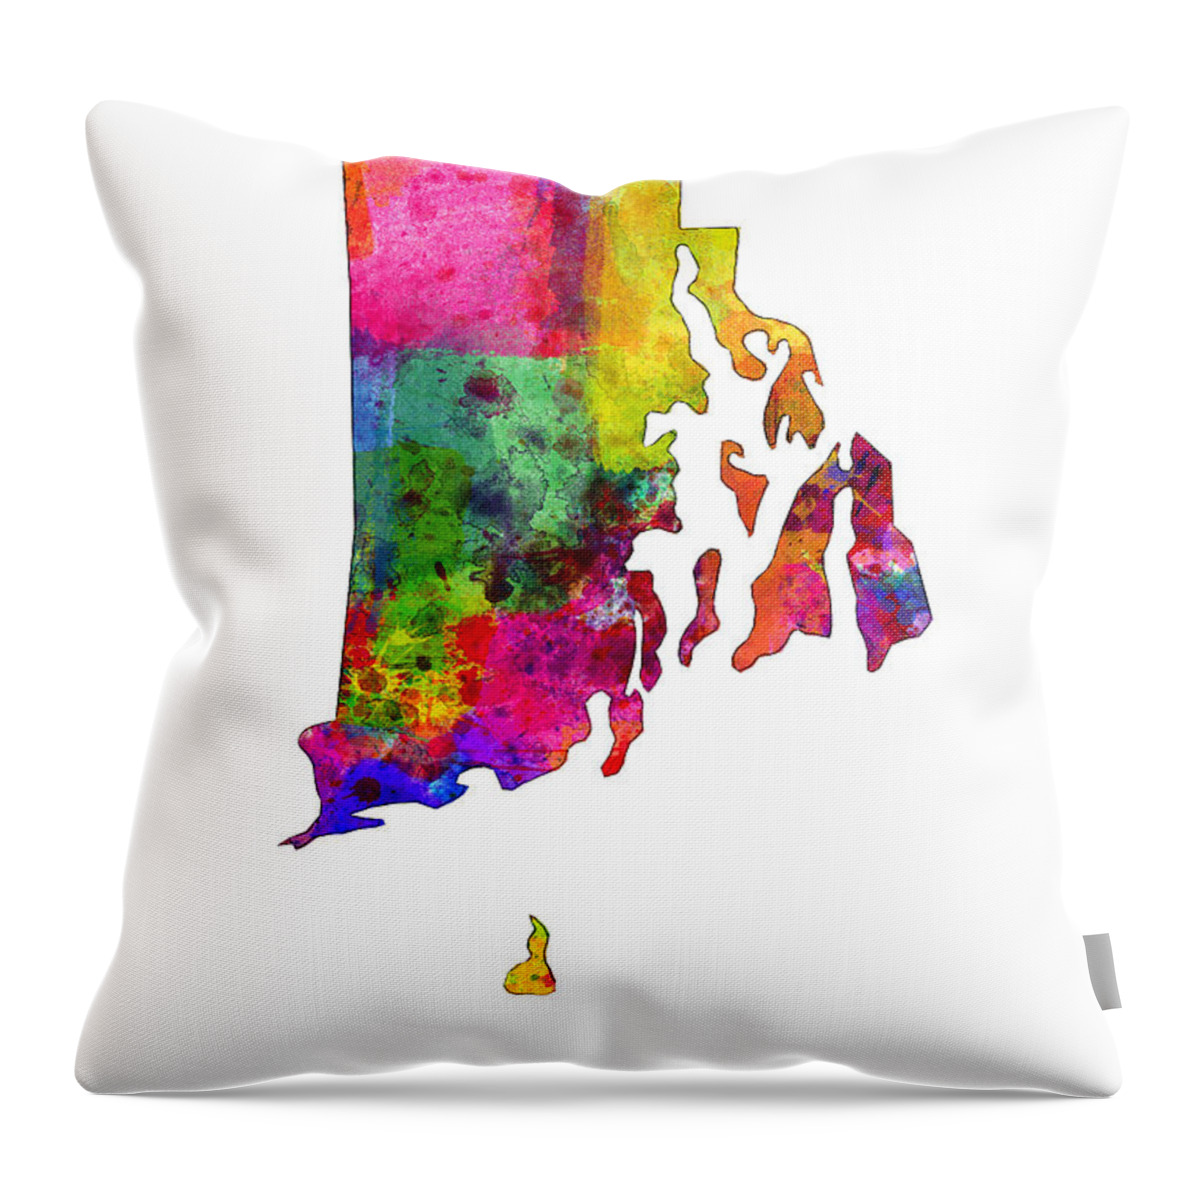 United States Map Throw Pillow featuring the digital art Rhode Island Watercolor Map by Michael Tompsett